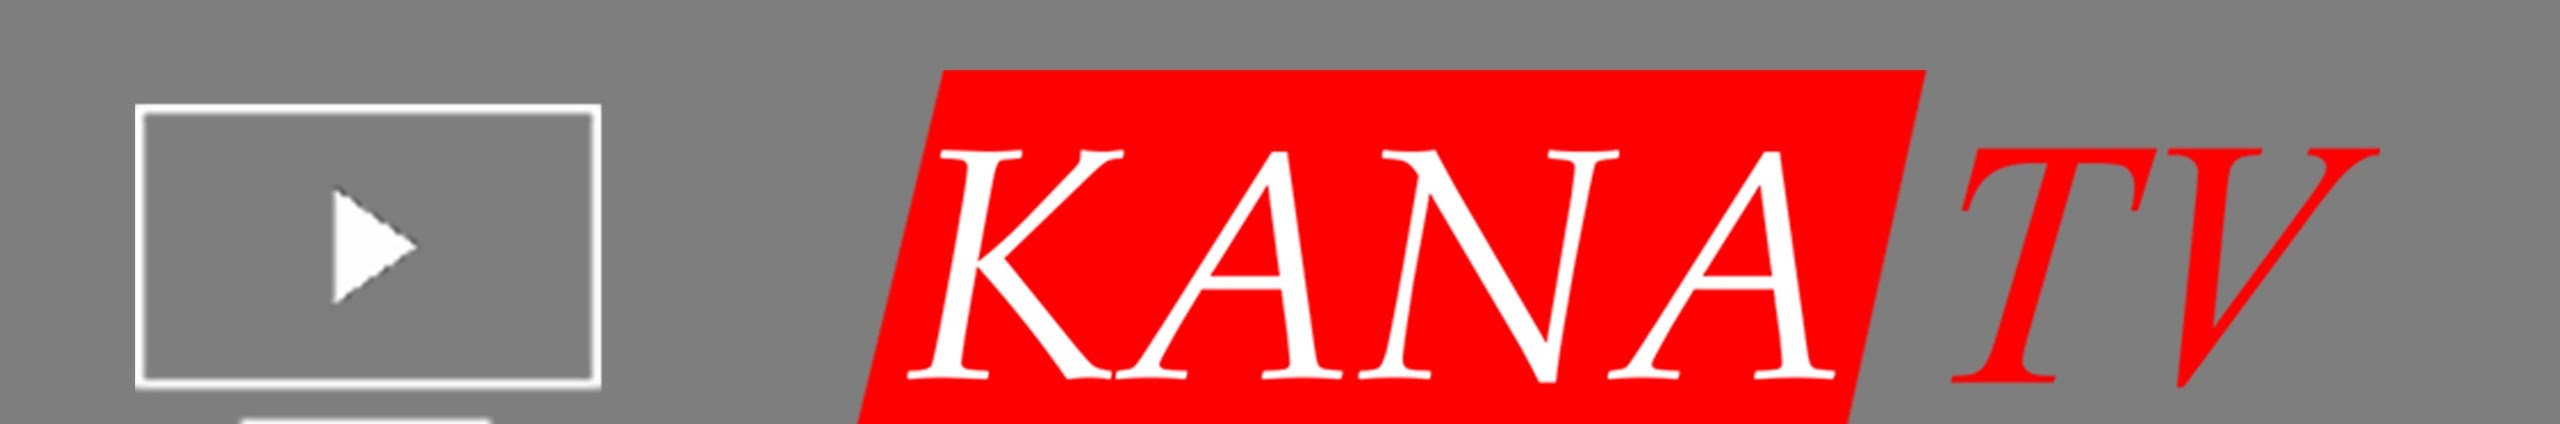 Kana Tv Youtube Channel Analytics And Report Powered By Noxinfluencer Mobile